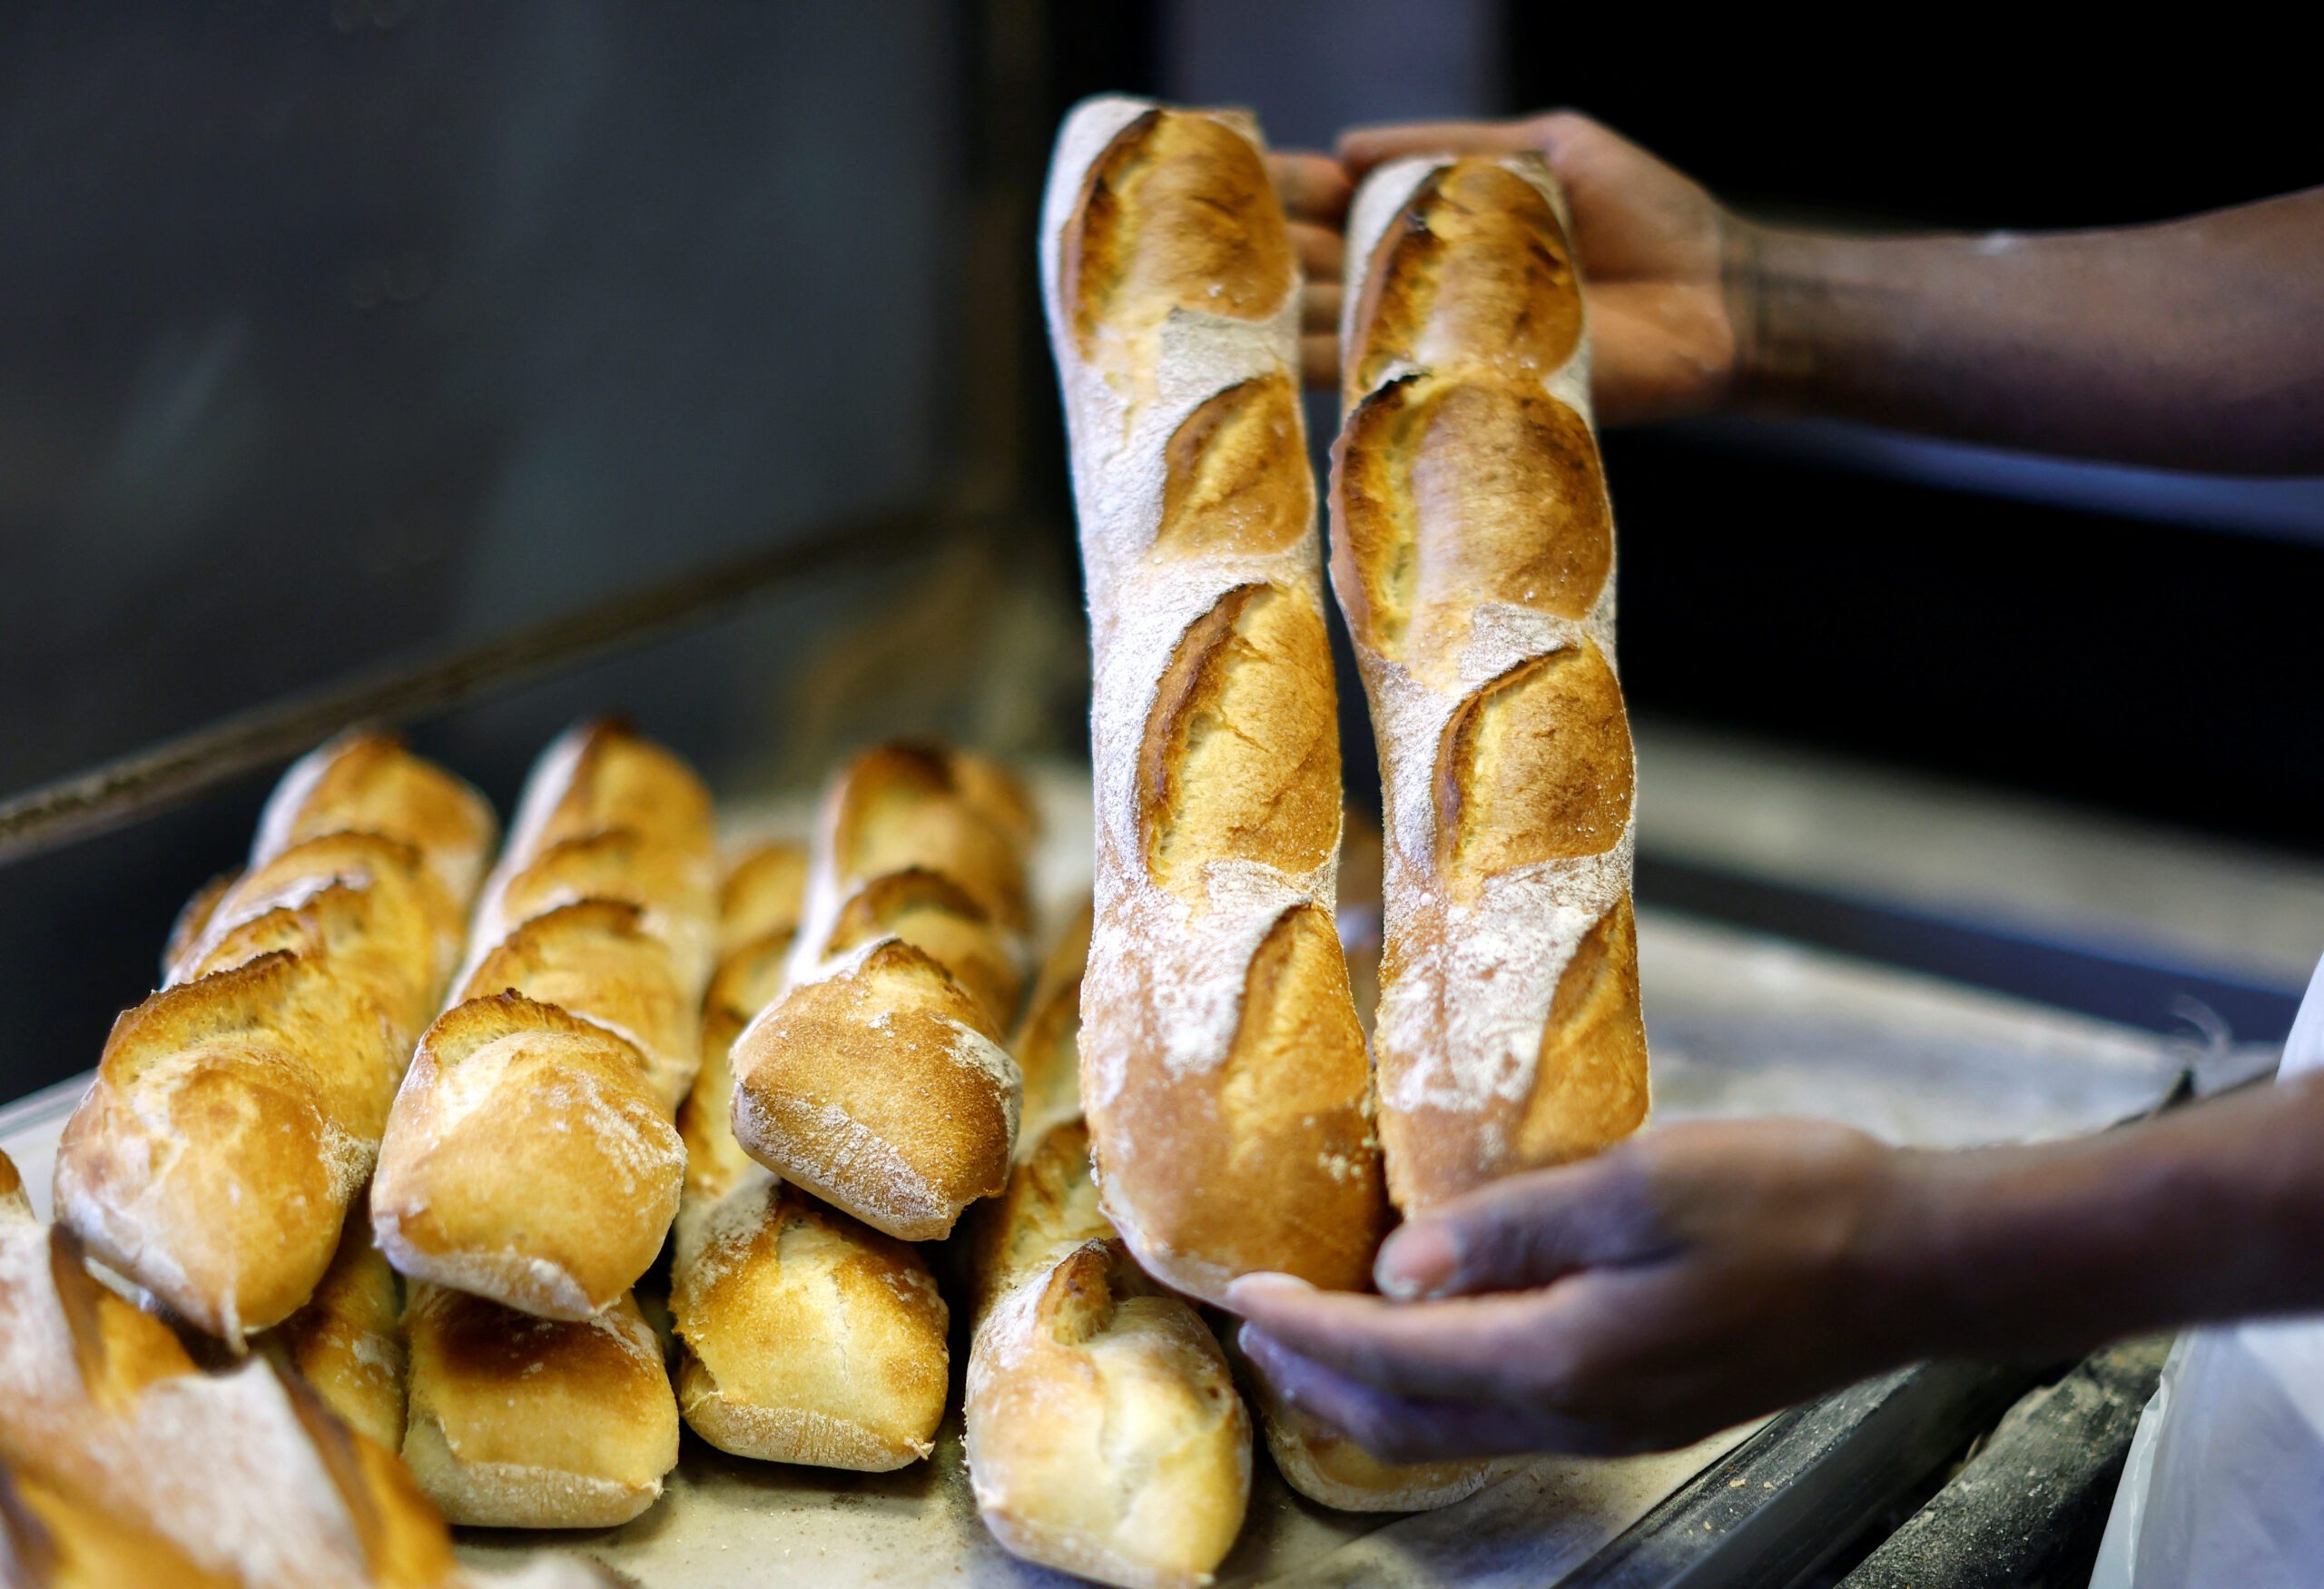 French baguette is now part of World Cultural Heritage list